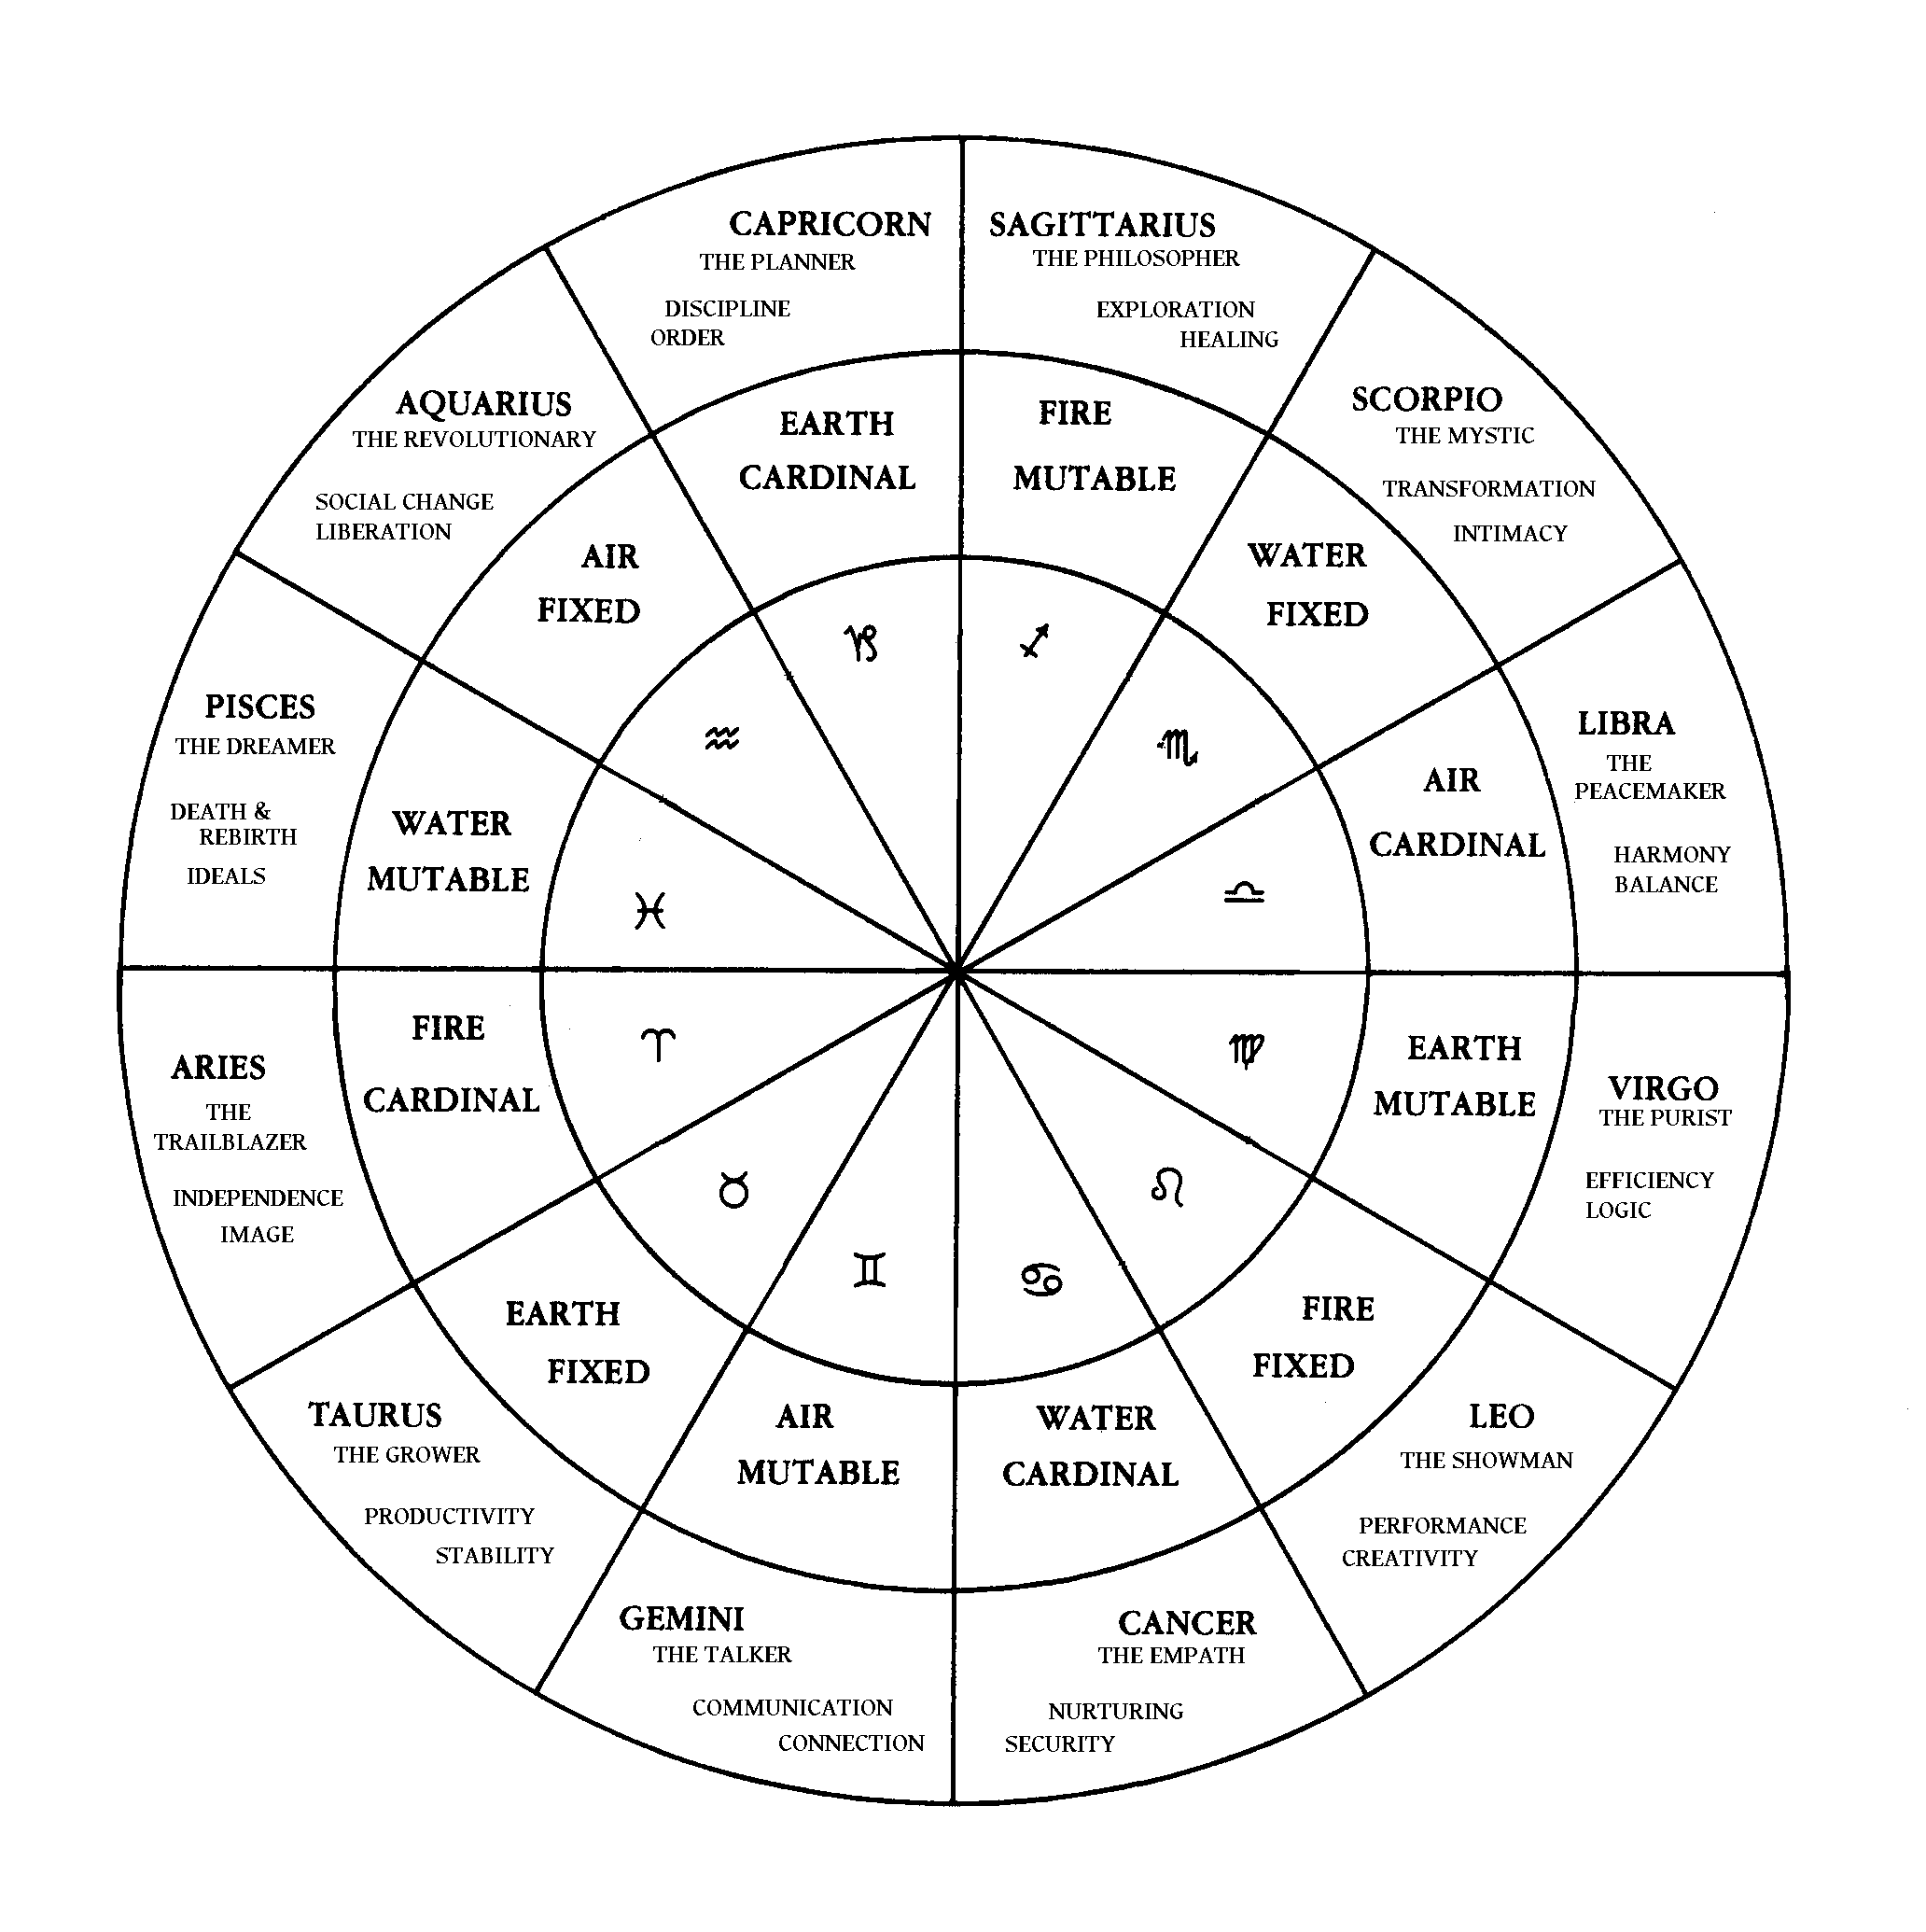 The astrological wheel